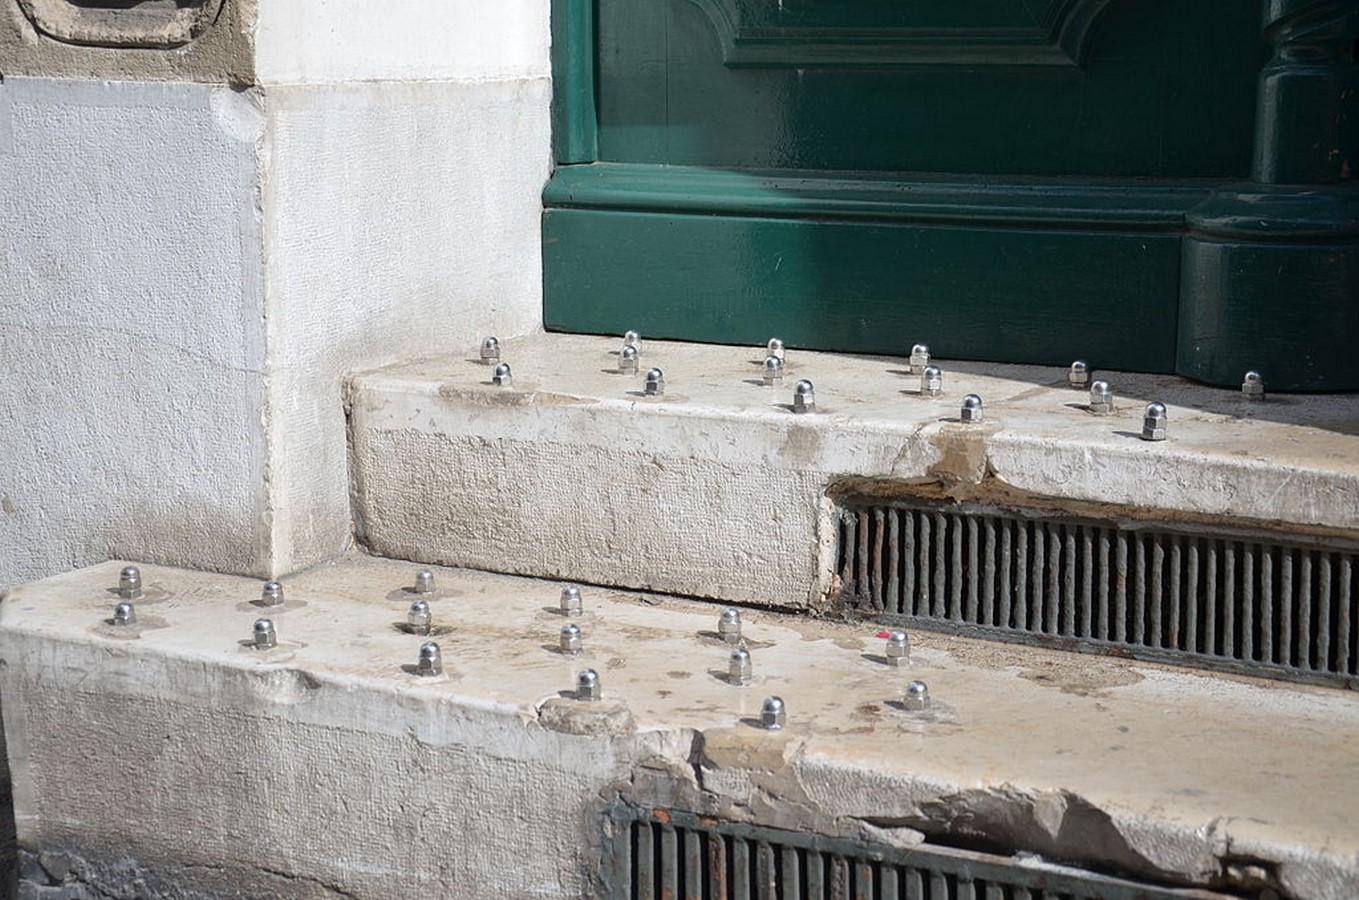 Hostile Architecture - Obstructed spaces in France- Sheet1